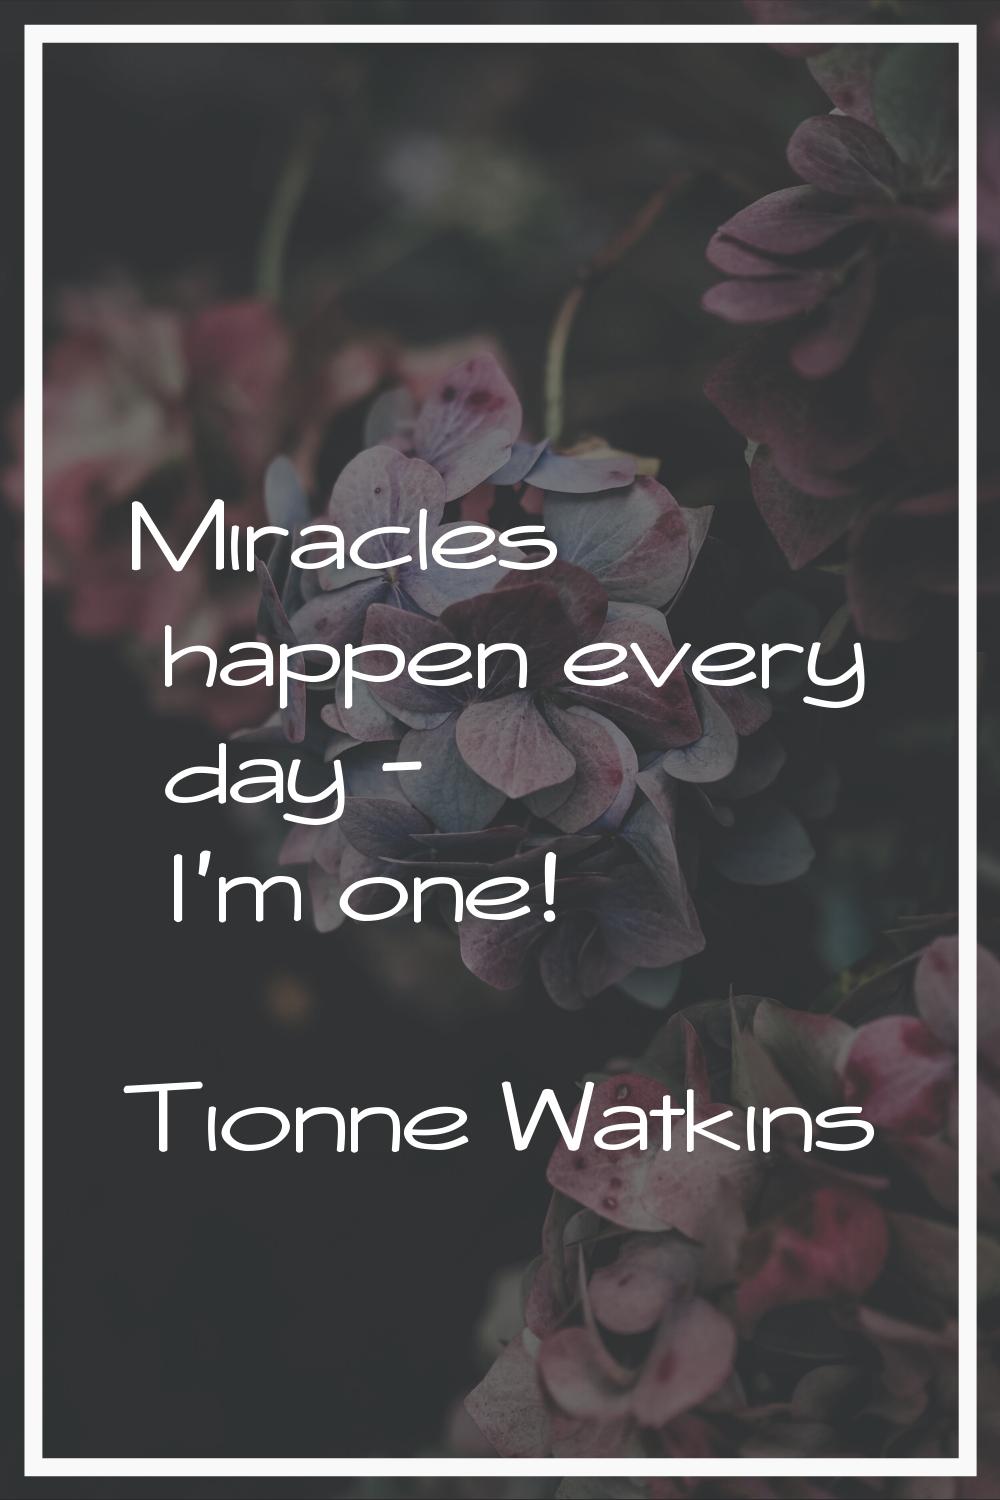 Miracles happen every day - I'm one!